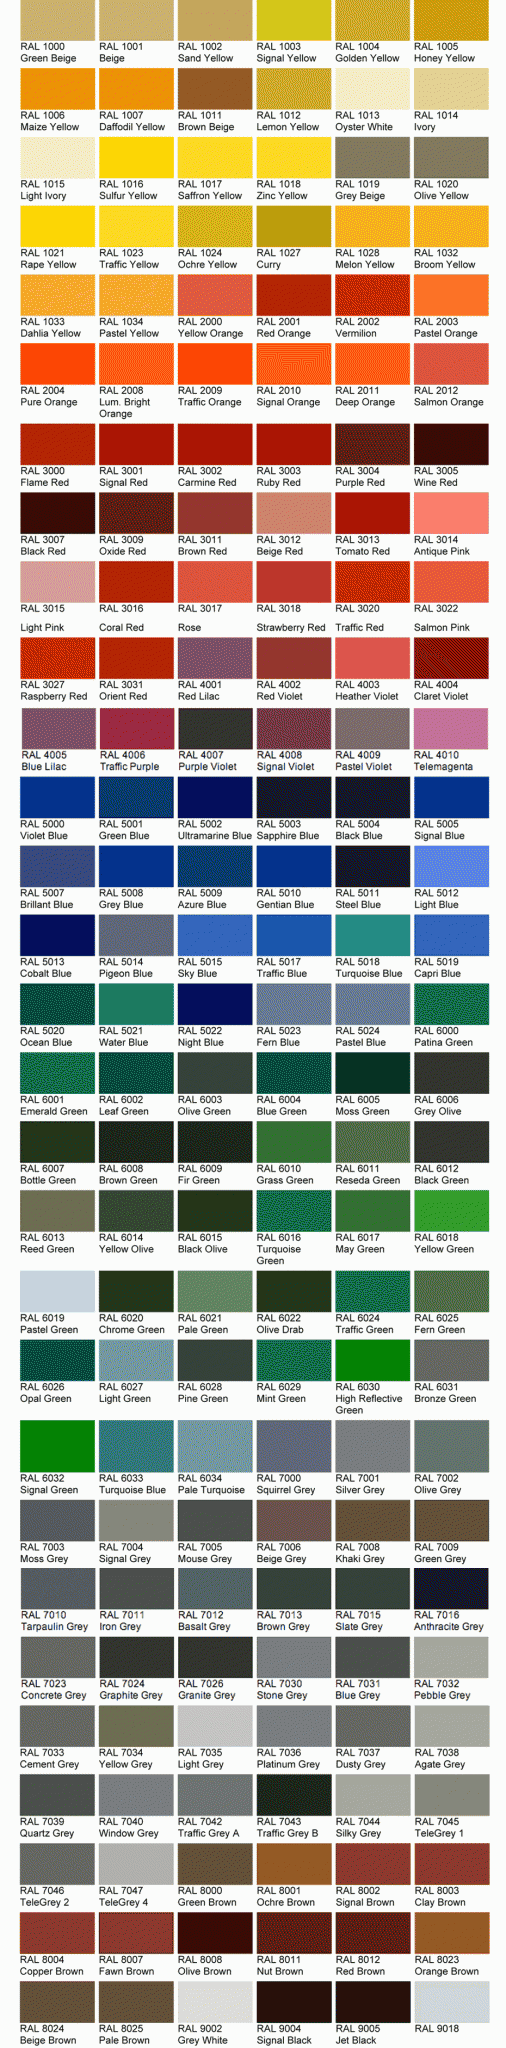 Ral Color Chart Pdf Ral Color Chart Ral Colours Ral Colour Chart Images